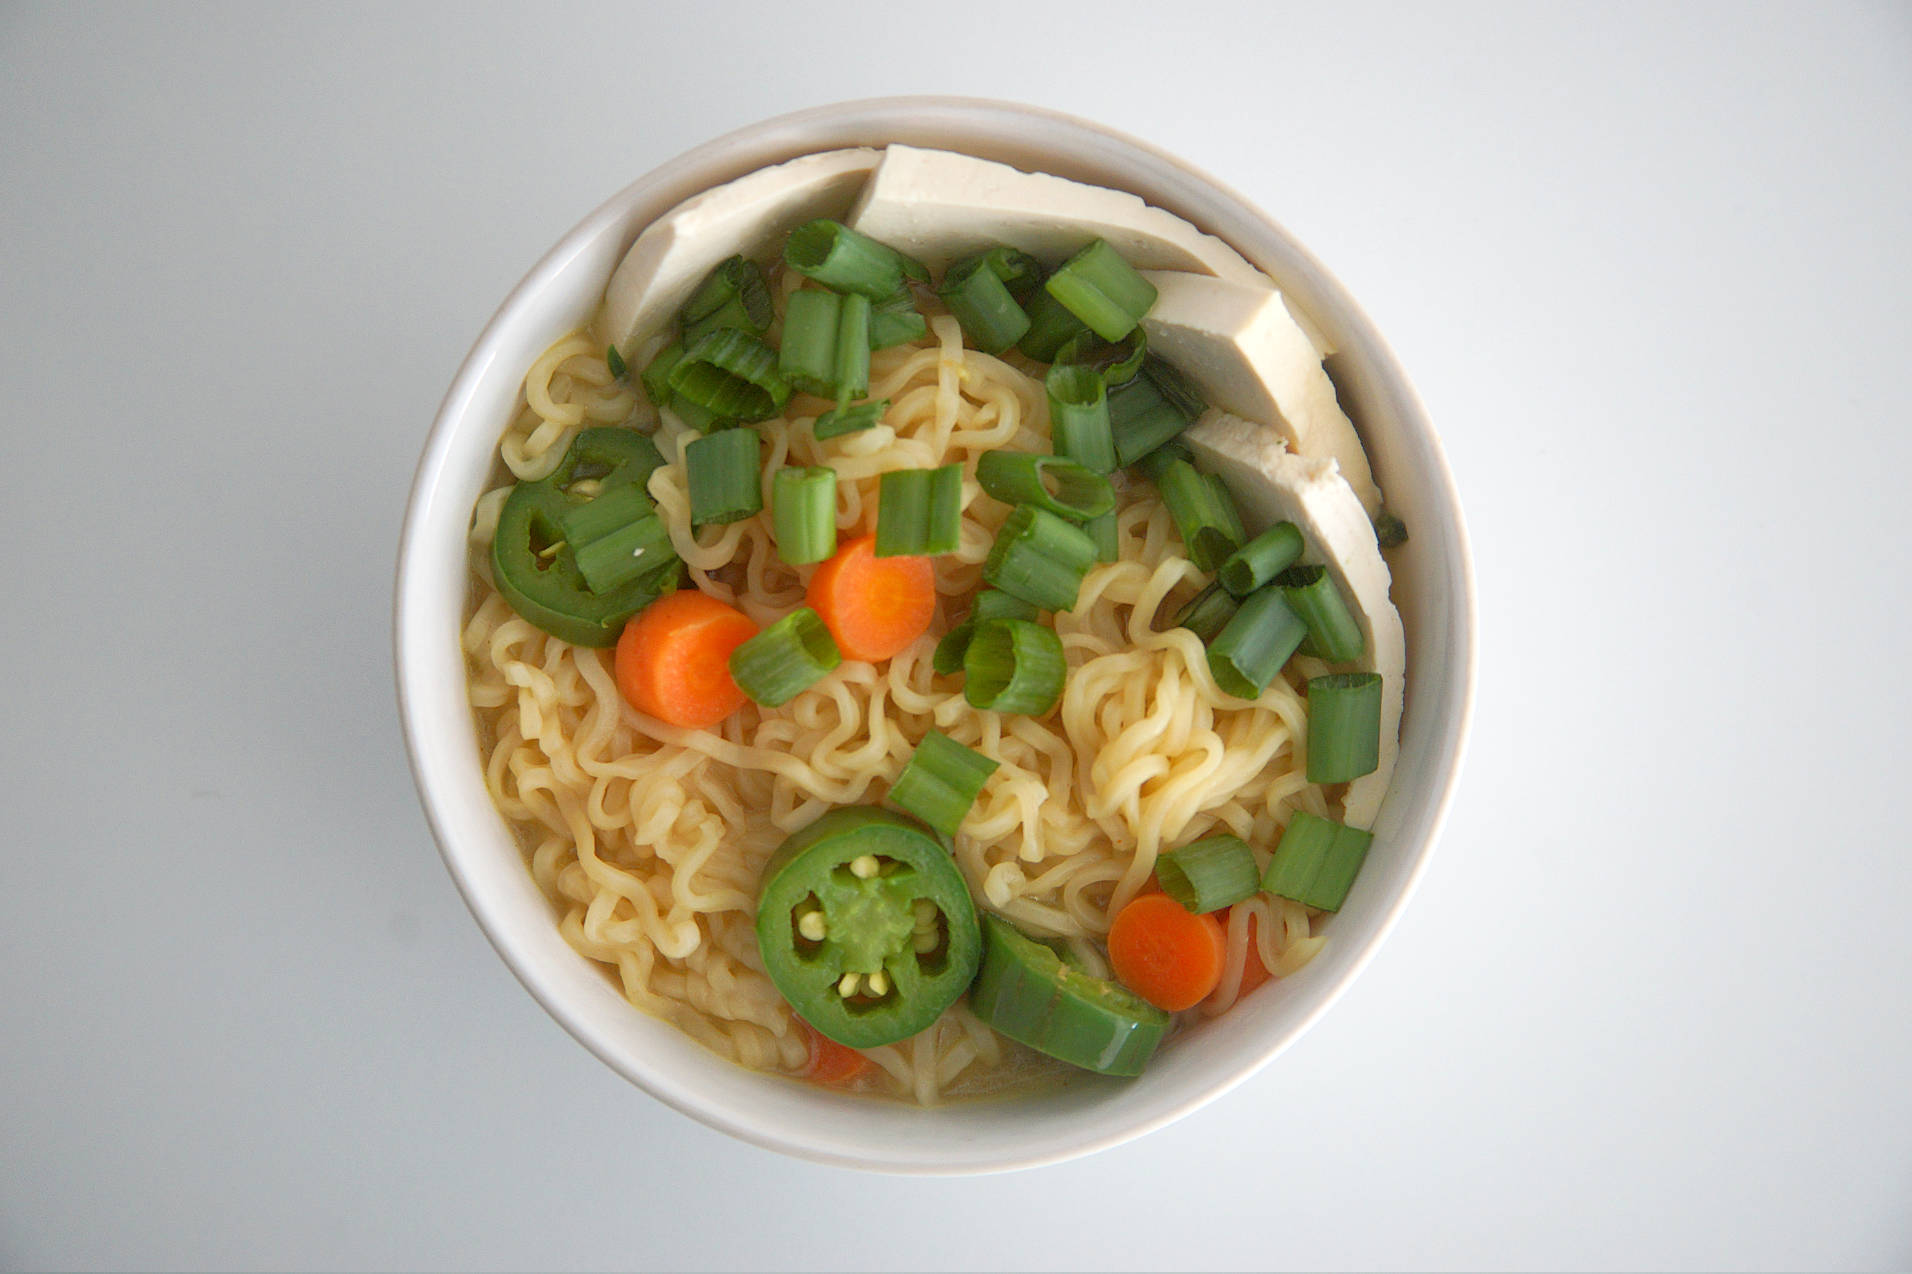 Maruchan instant noodles with added vegetables